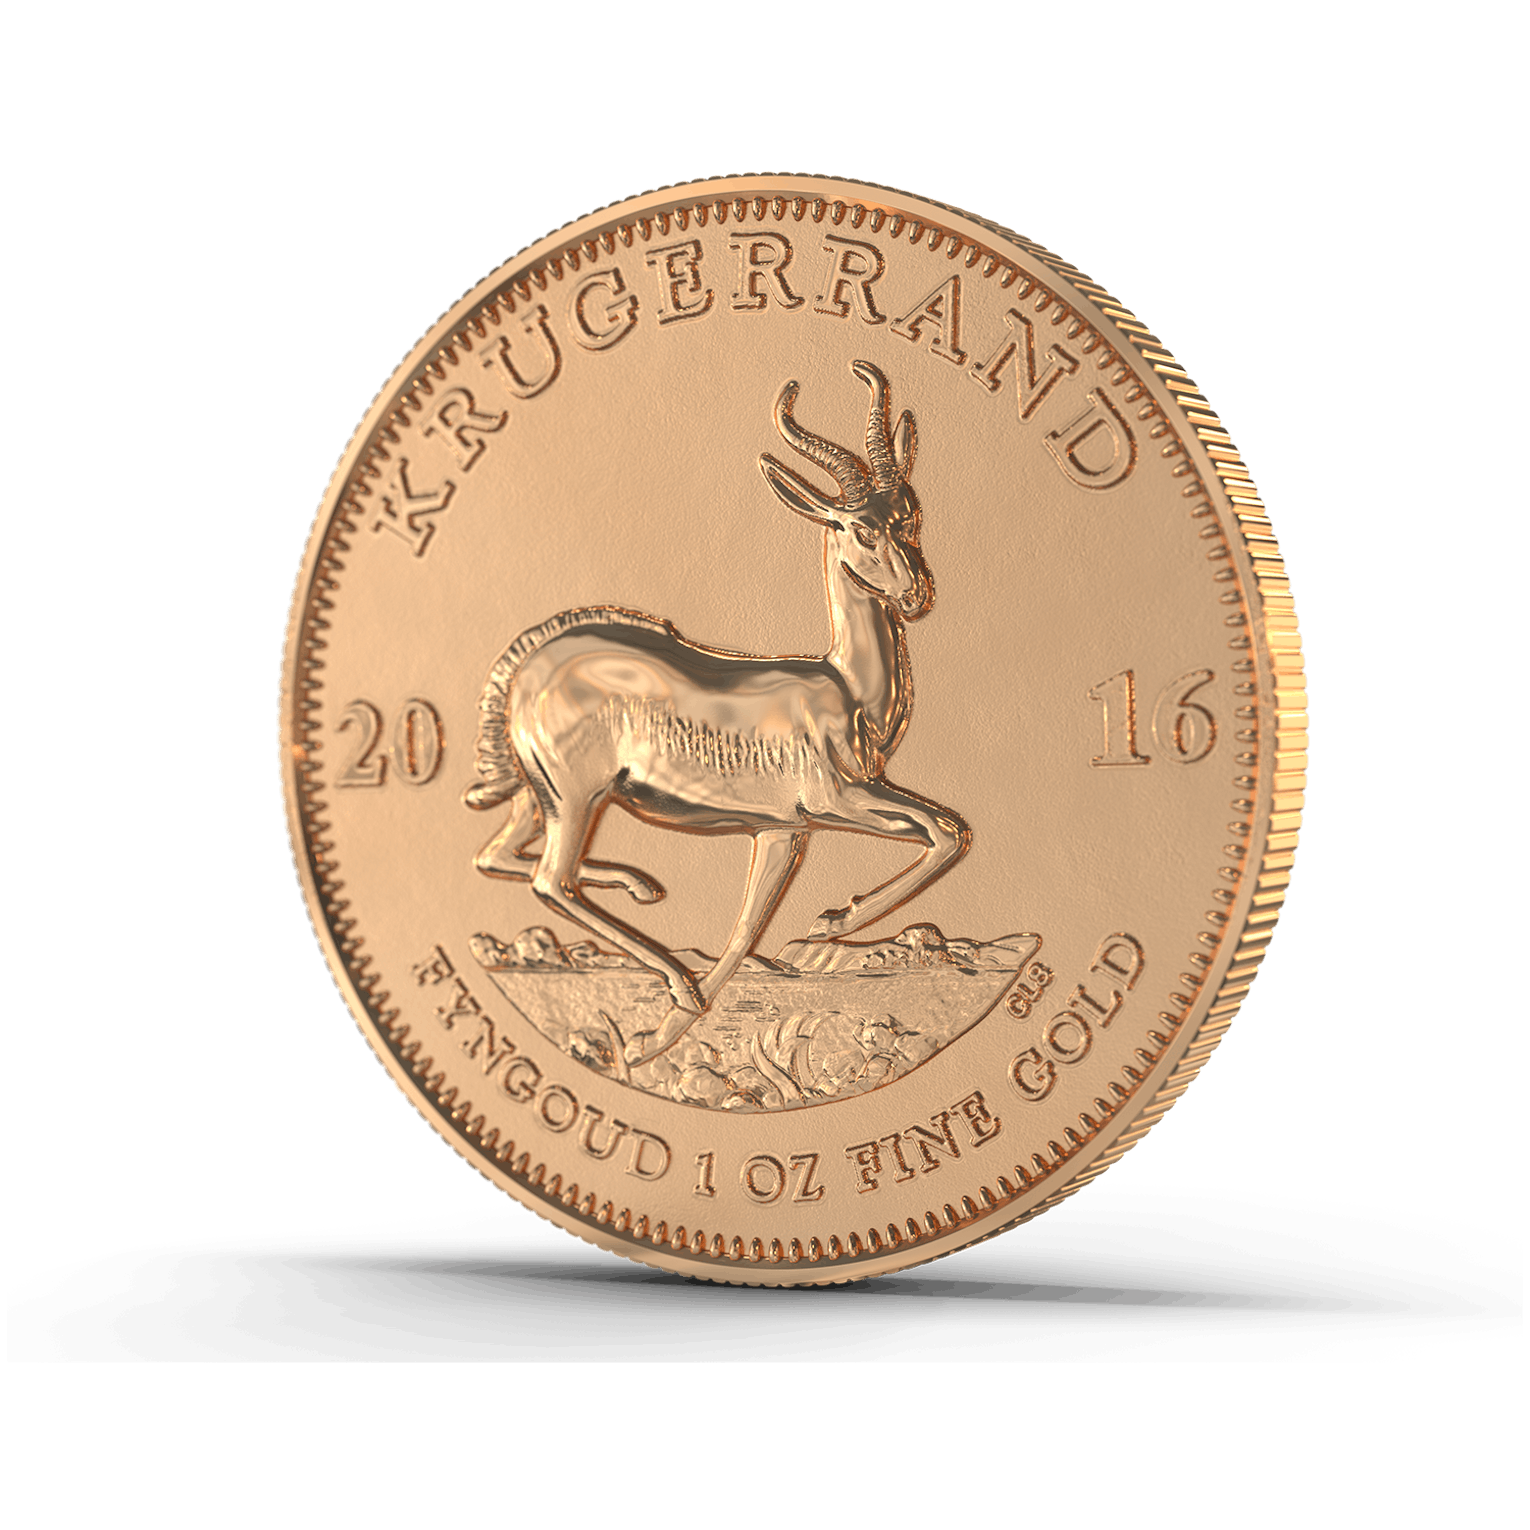 The Krugerrand from South Africa is the most famous investment gold coin in the world today. 